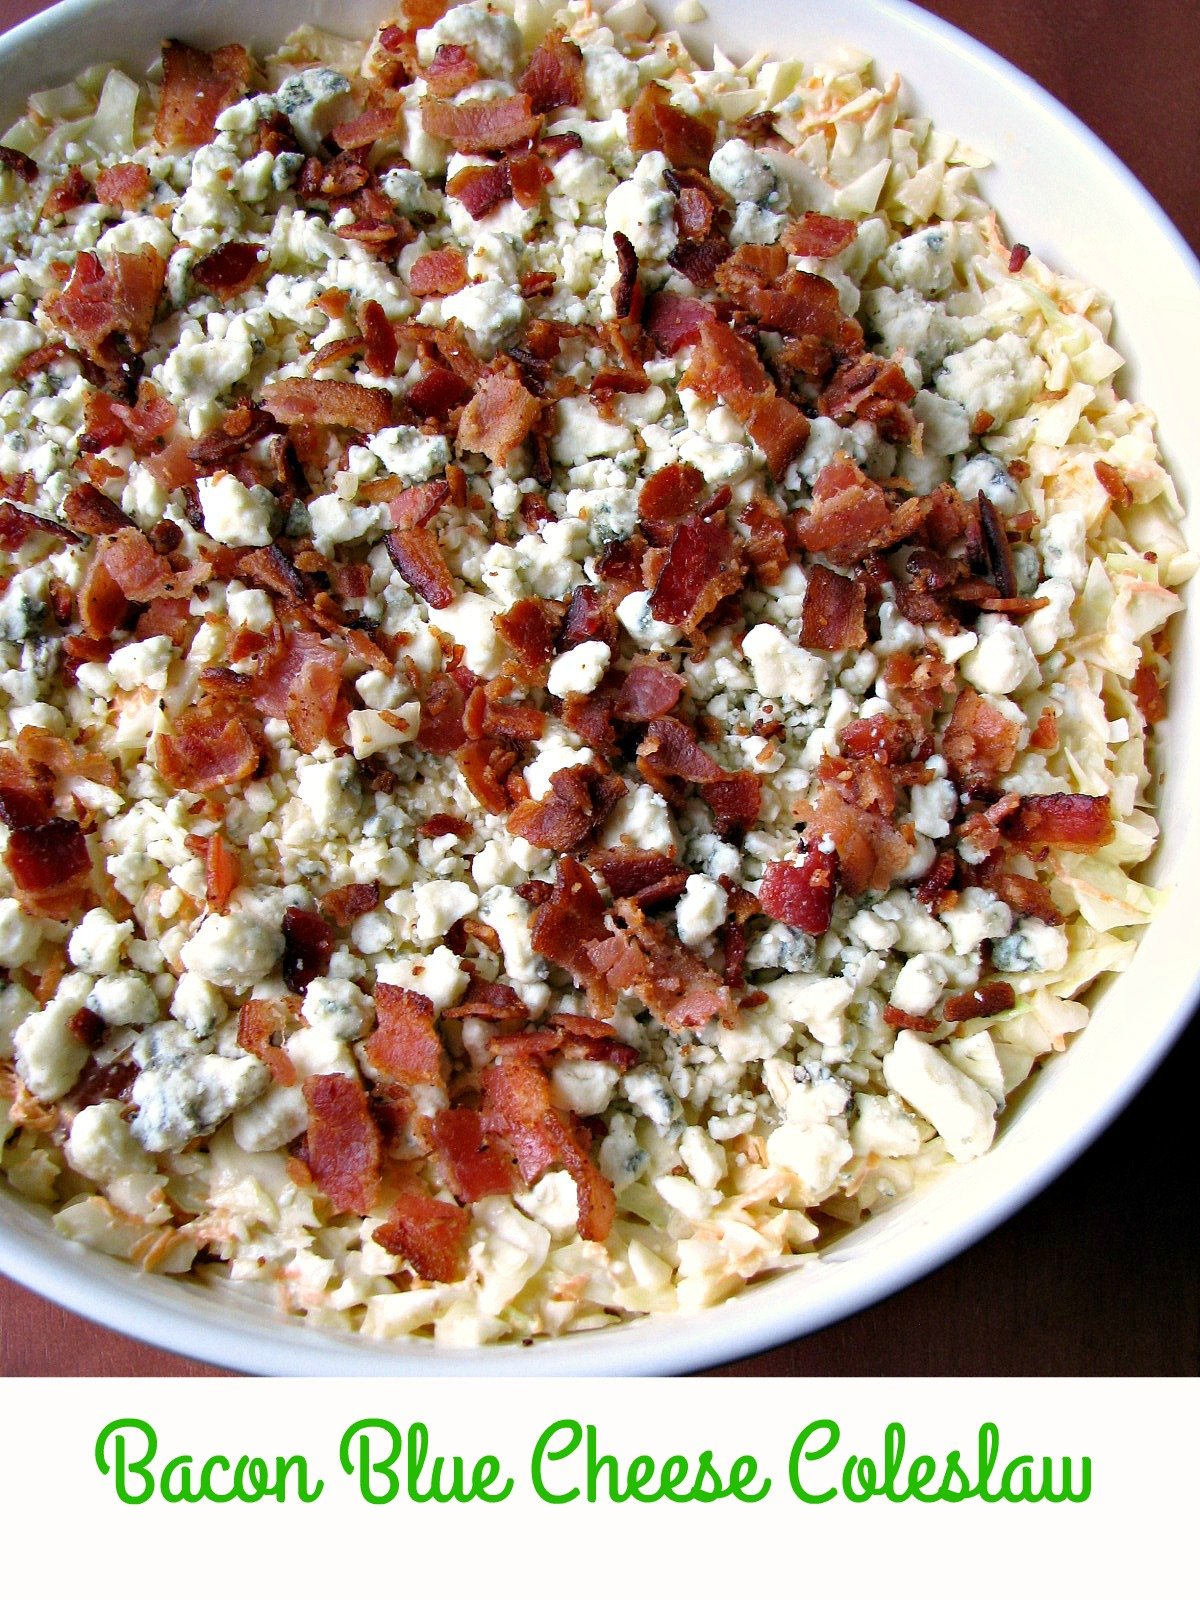 Bacon Blue Cheese Coleslaw, made with fresh cabbage, carrots, blue cheese crumbles, and crispy bacon, is the perfect salad for all of your summer cookouts.